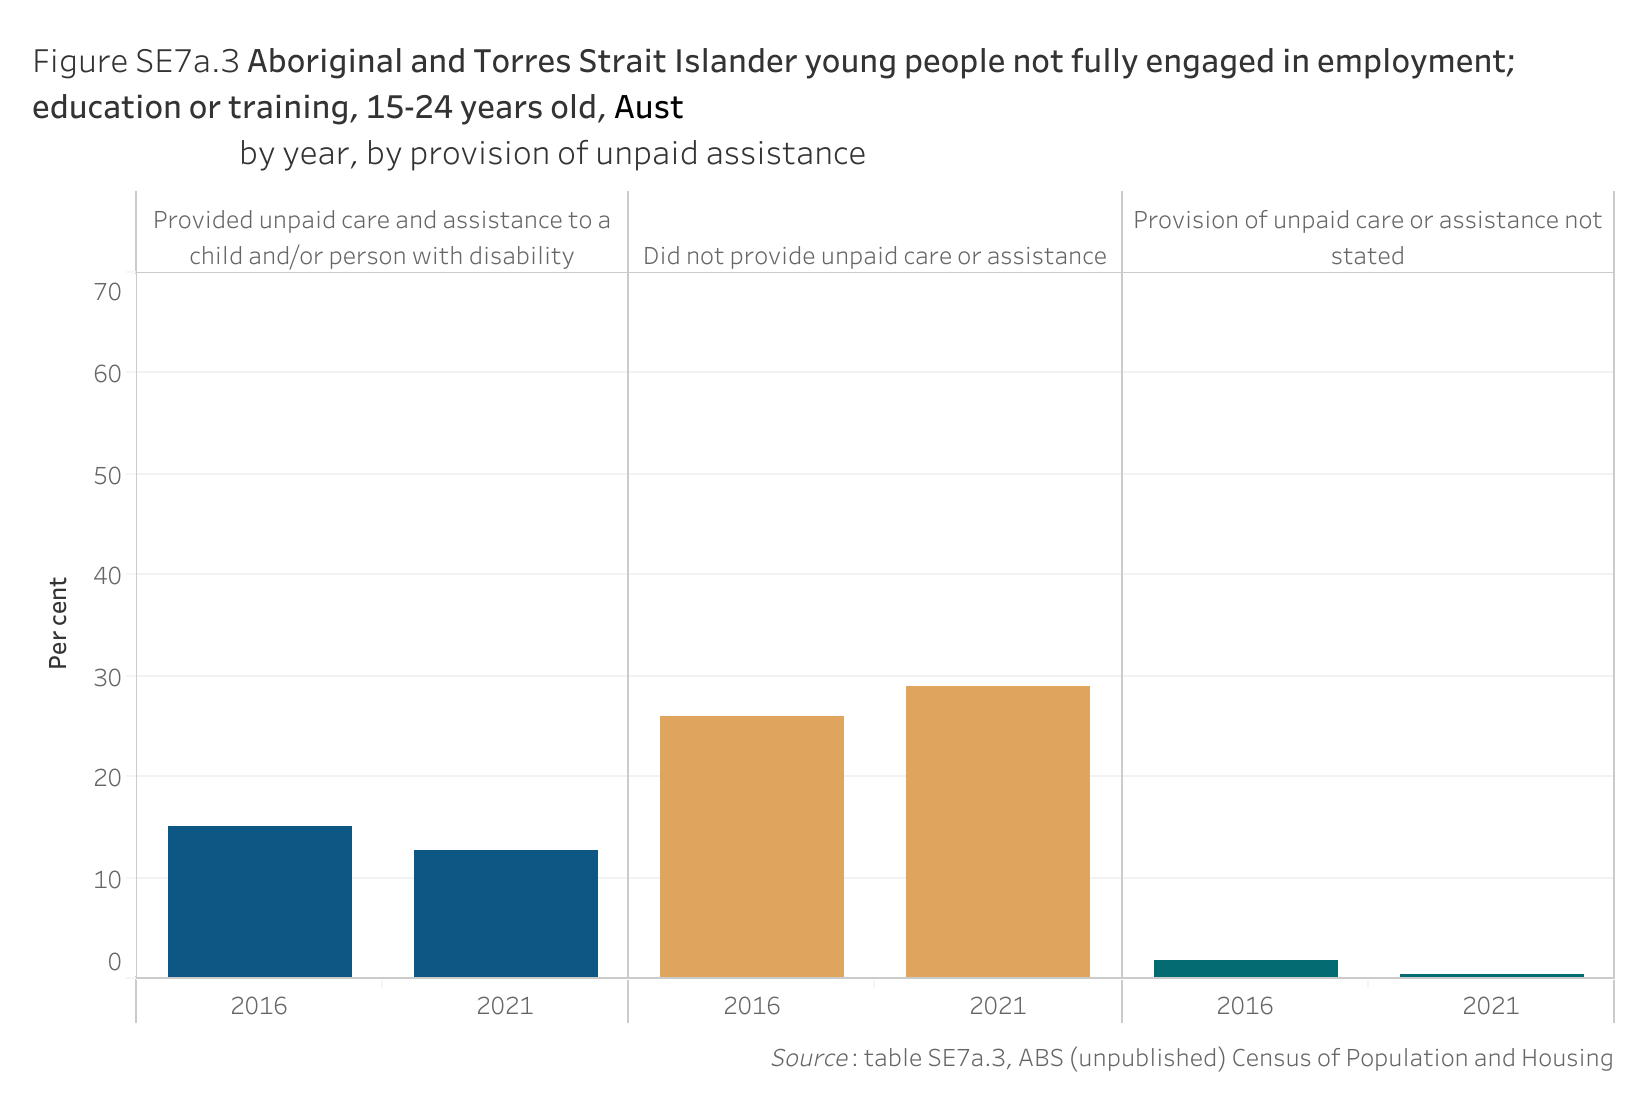 Figure SE7a.3 shows Aboriginal and Torres Strait Islander young people not fully engaged in employment; education or training, 15-24 years old, Australia, by year, by provision of unpaid assistance. More details can be found within the text near this image.